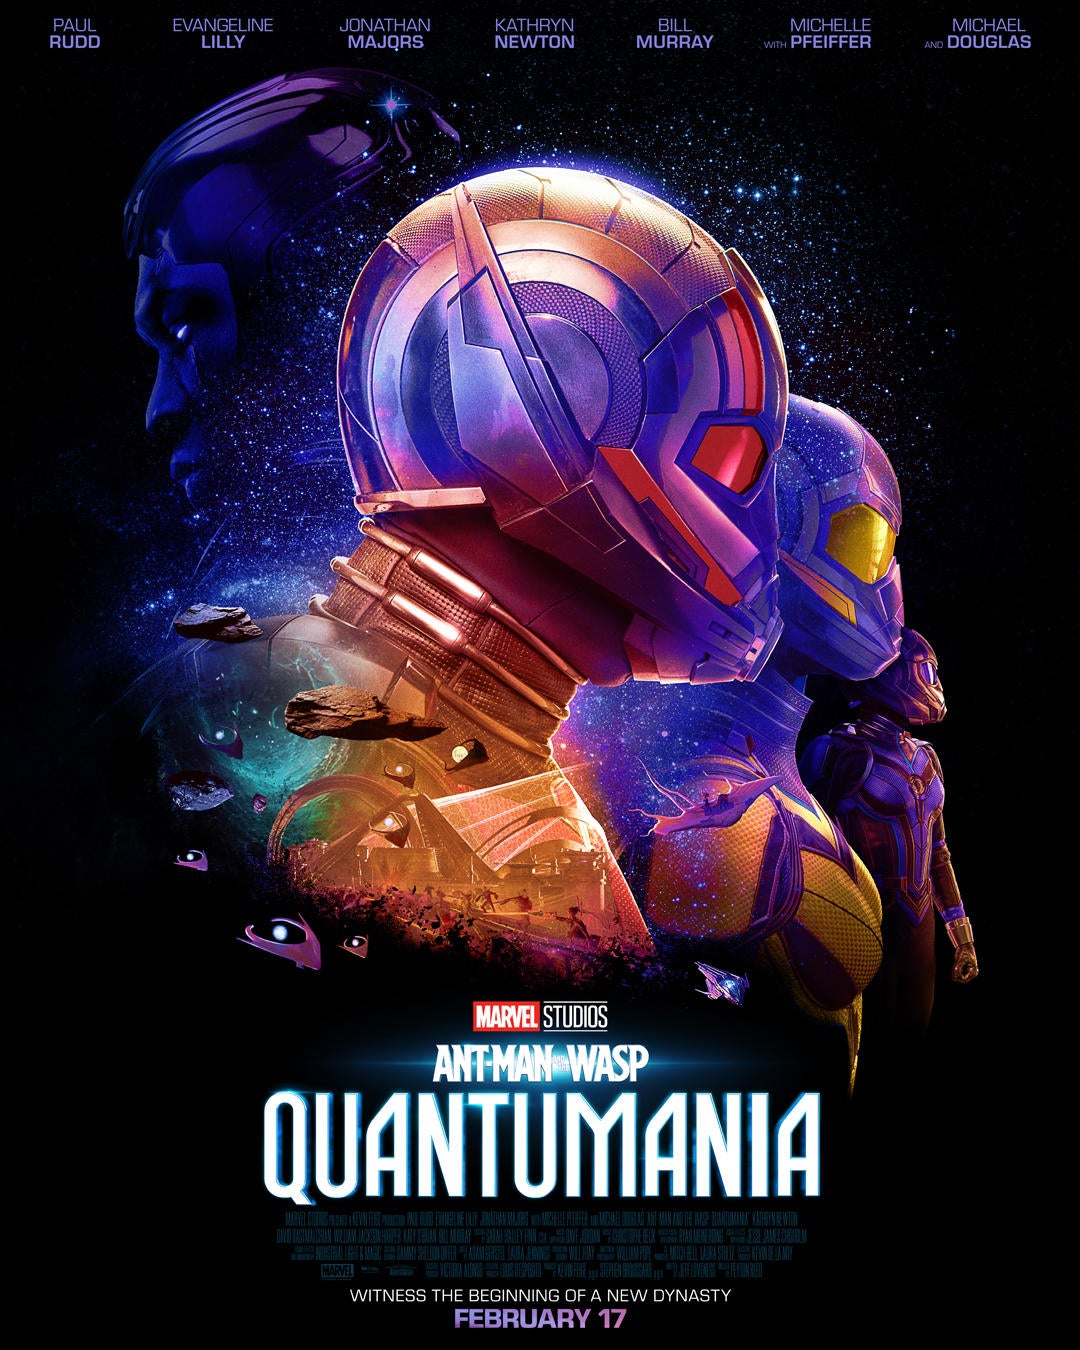 ant-man-and-the-wasp-quantumania-teaser-poster.jpg